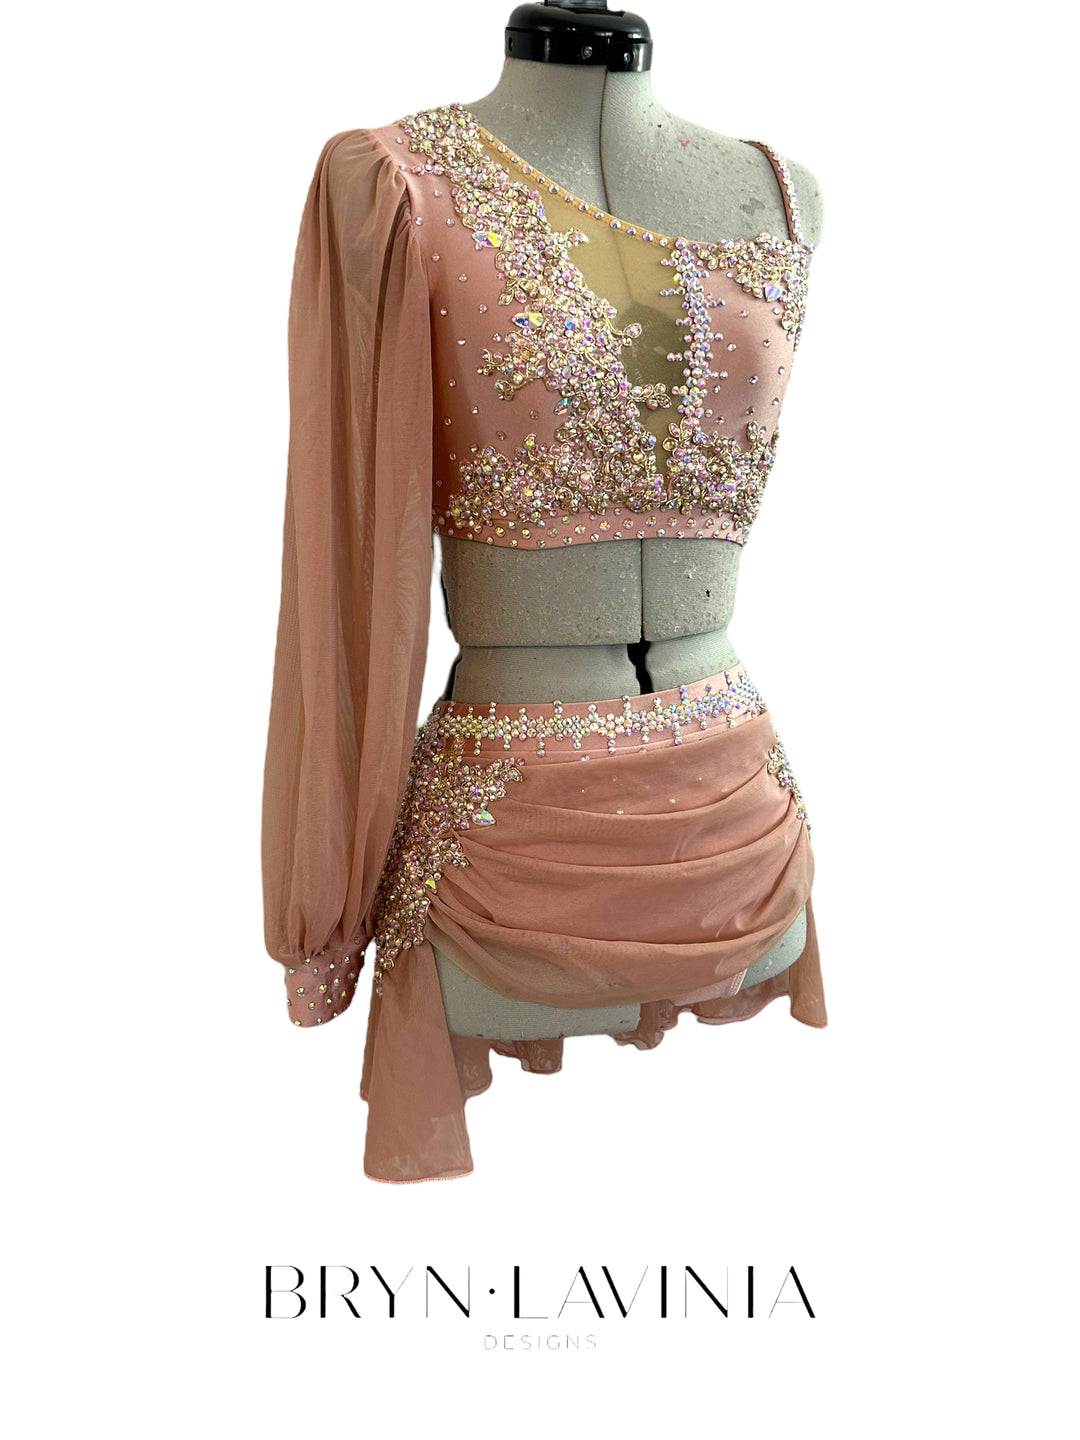 NEW AS Dusty Rose ready to ship costume